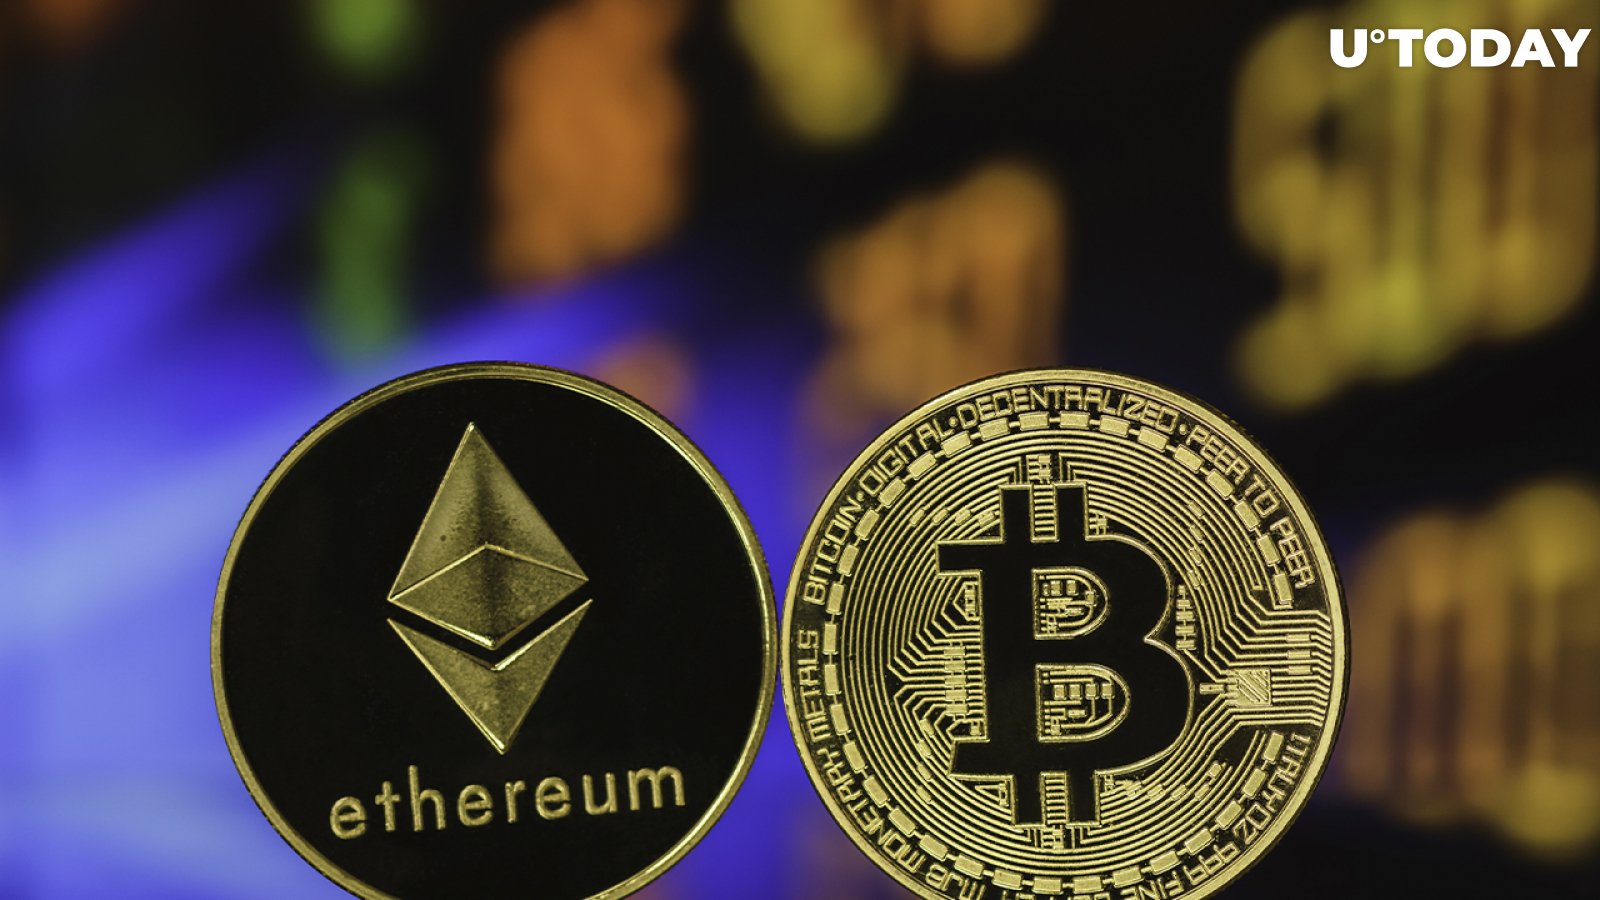 Bitcoin and Ethereum Positive Catalysts to Watch Out for in 2022: IntoTheBlock